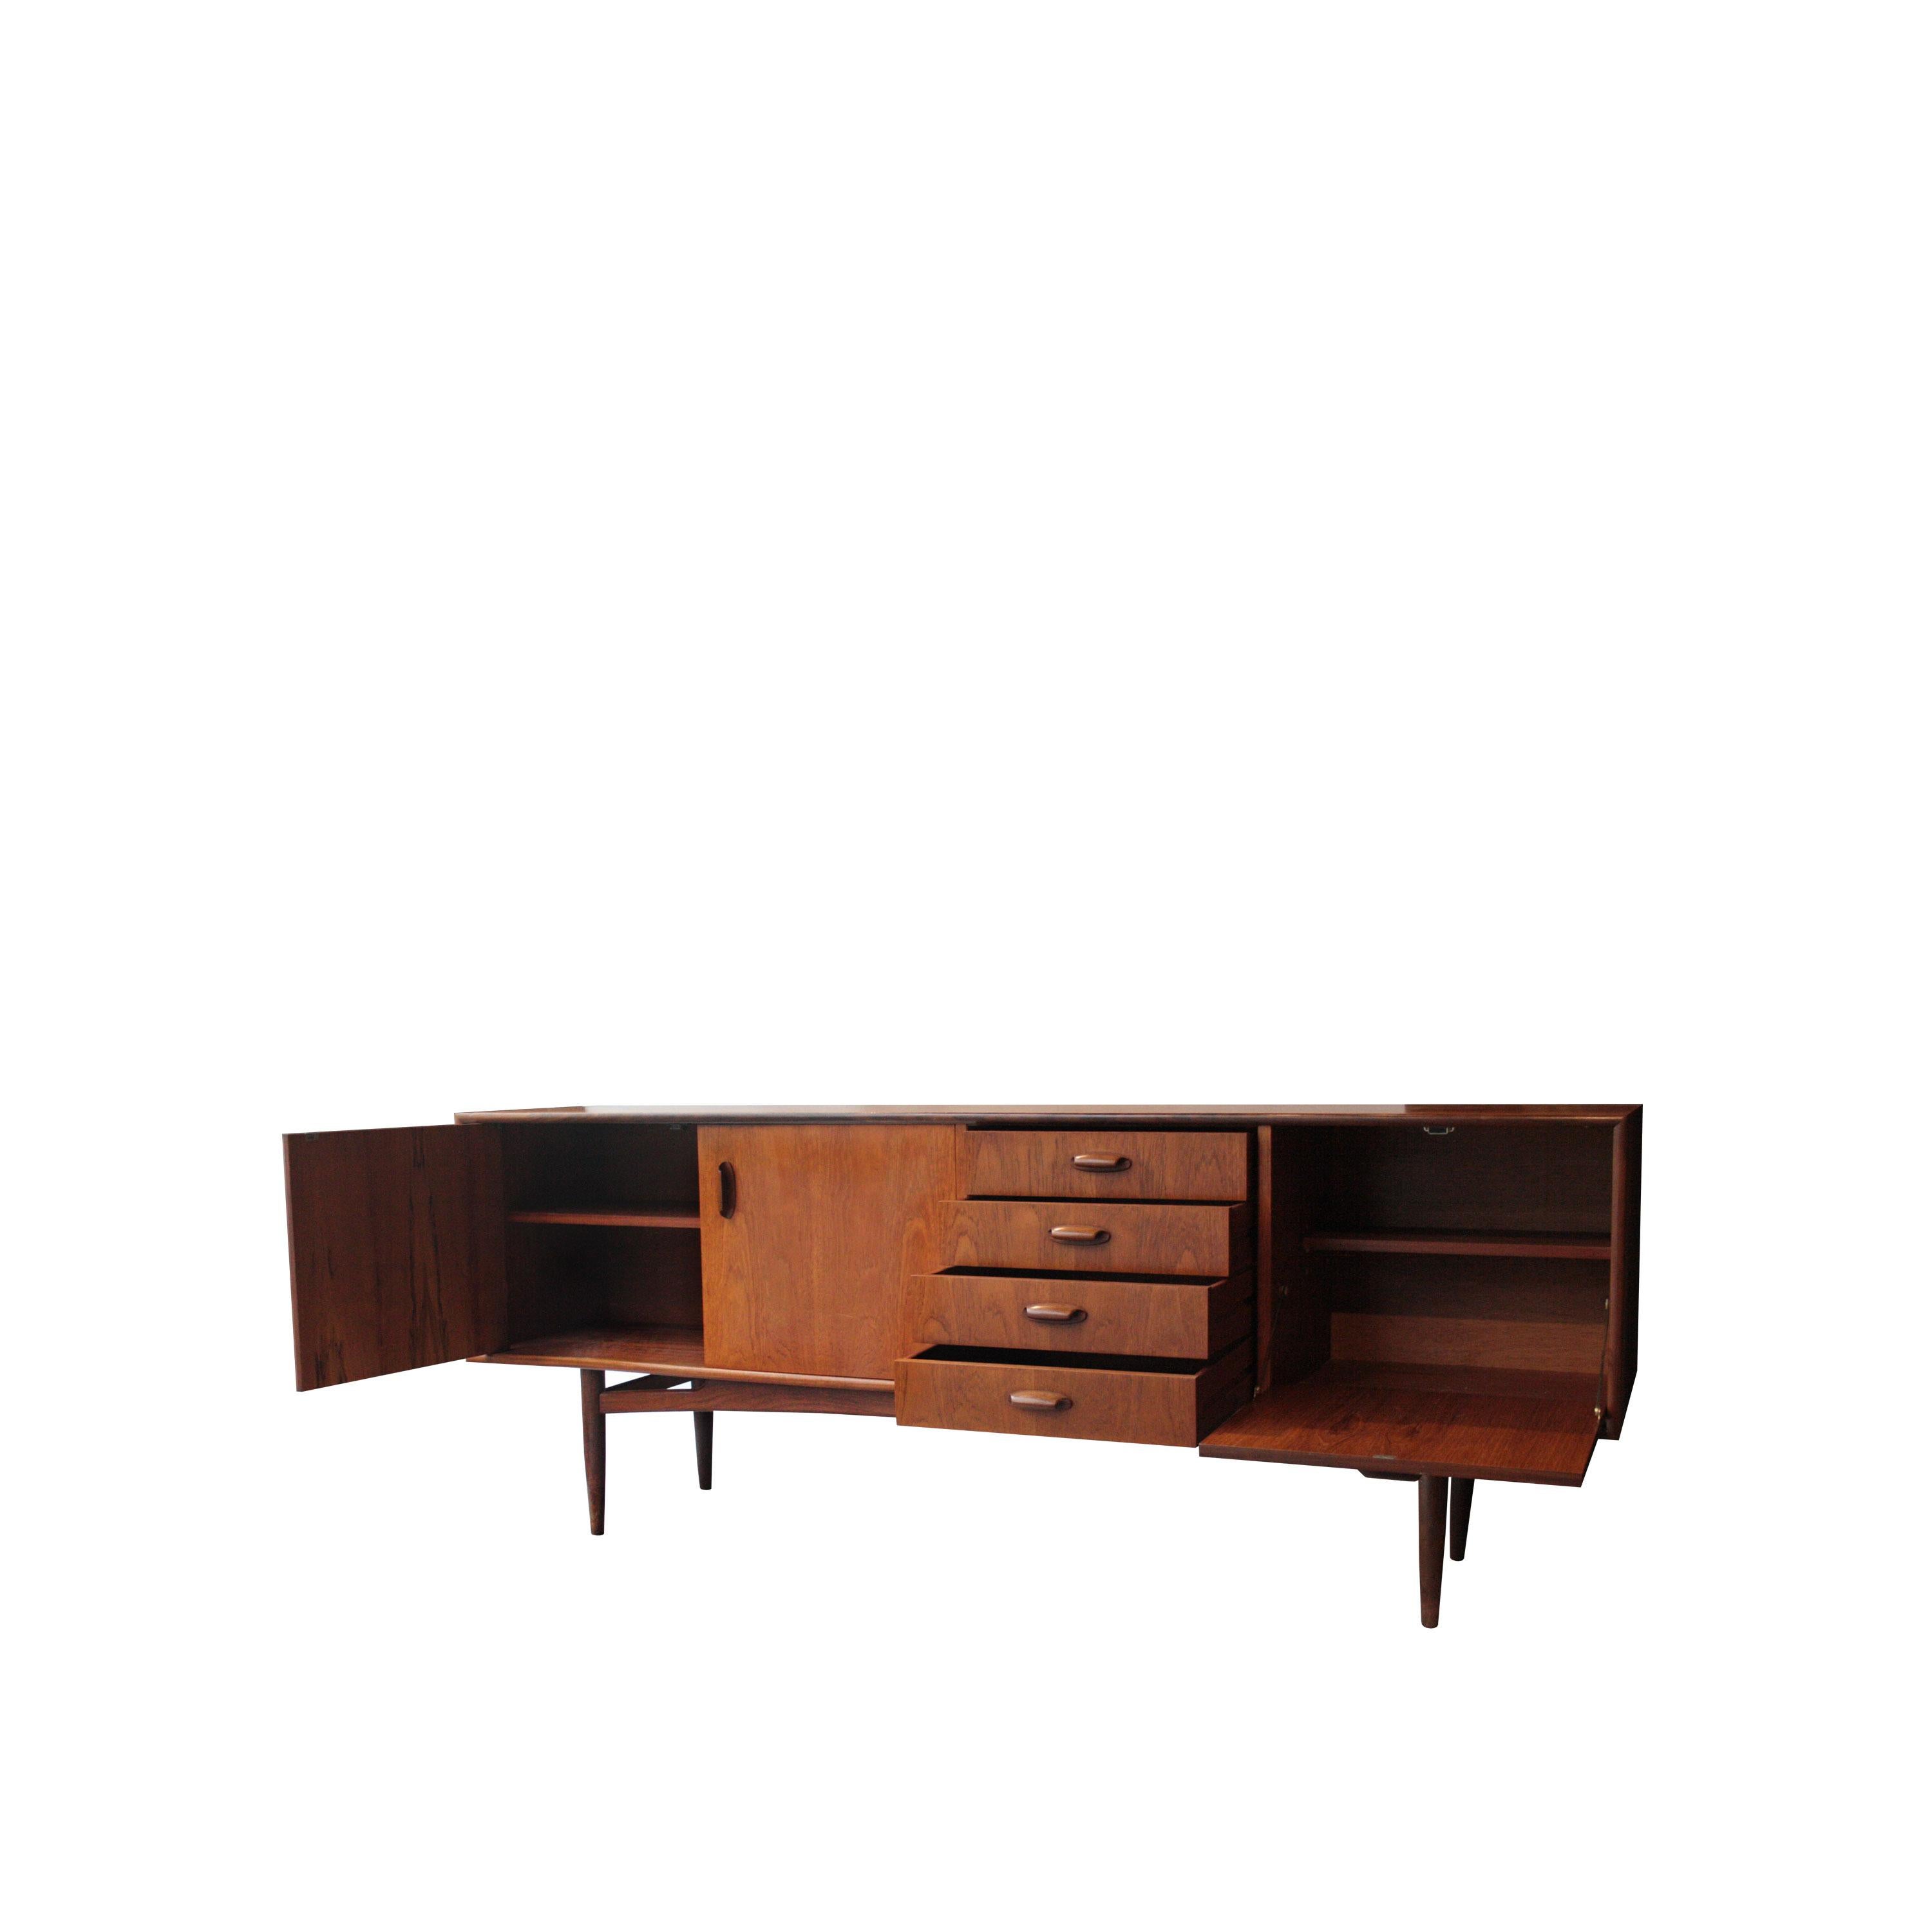 G Plan sideboard that was introduced in 1964 and was made until 1971. It was gradually overcome starting in 1968 by the Fresco range. It is a model that we call Gold Label, since it usually has a golden mark instead of the later label of Plan G in